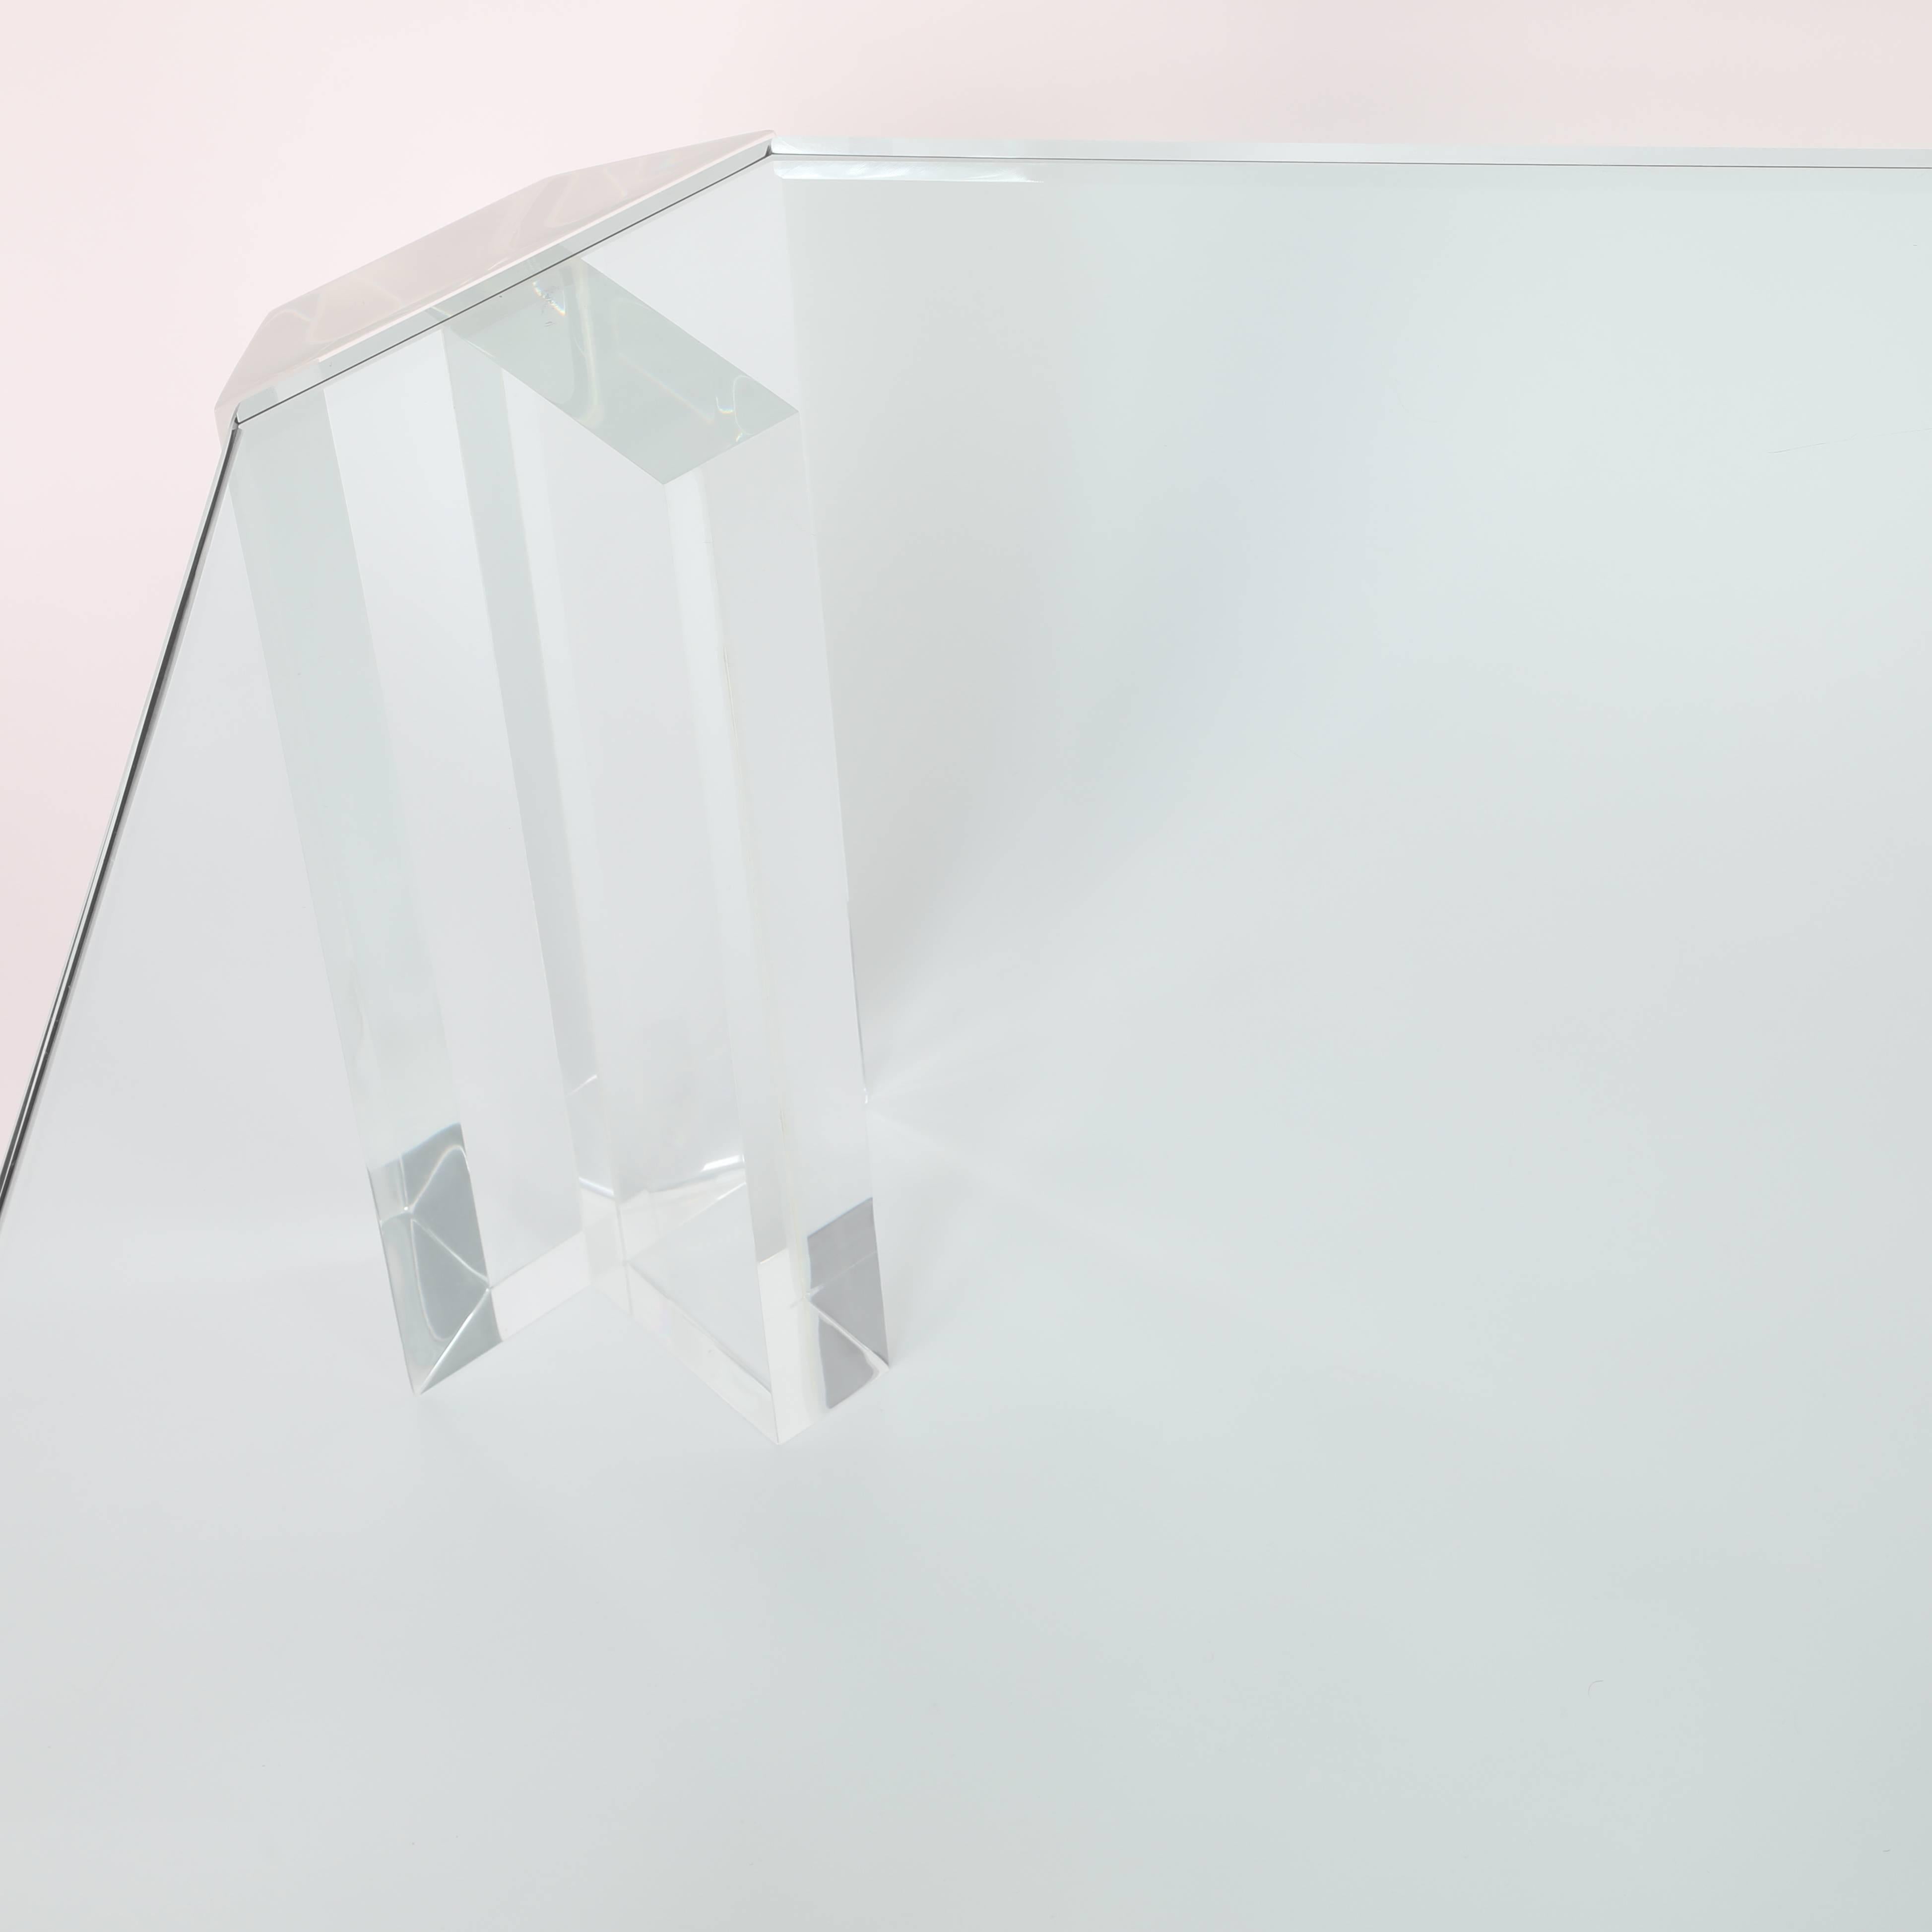 Rectangular 1970s Glass Cocktail Table with Clipped Corners and Lucite Supports For Sale 3